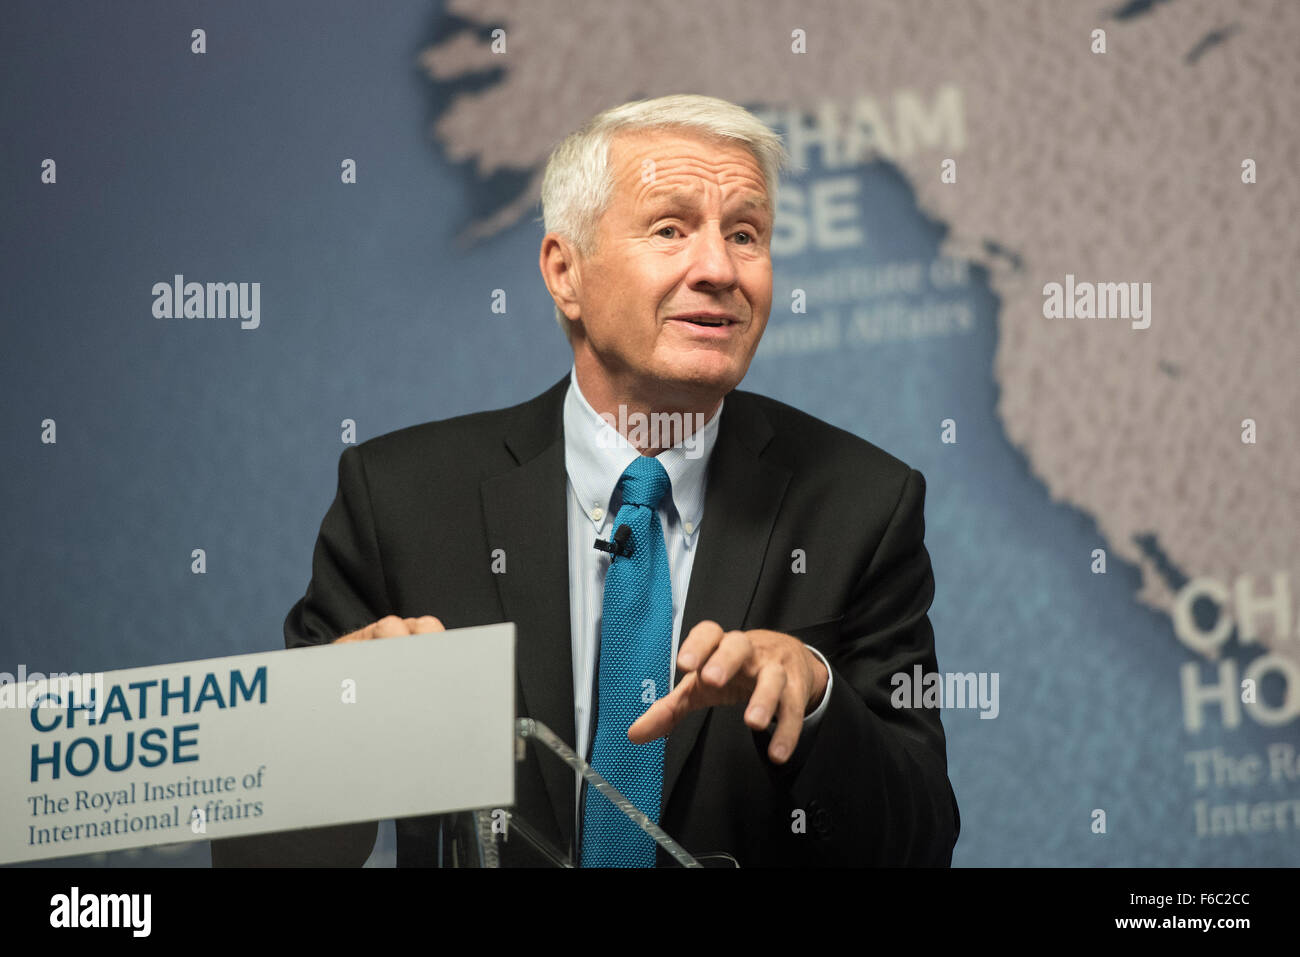 Secretary General of the Council of Europe, delivers his lecture 'Strengthening the Rule of Law Across Europe' at Chatham House.  Featuring: Thorbjorn Jagland Where: London, United Kingdom When: 16 Oct 2015 Stock Photo